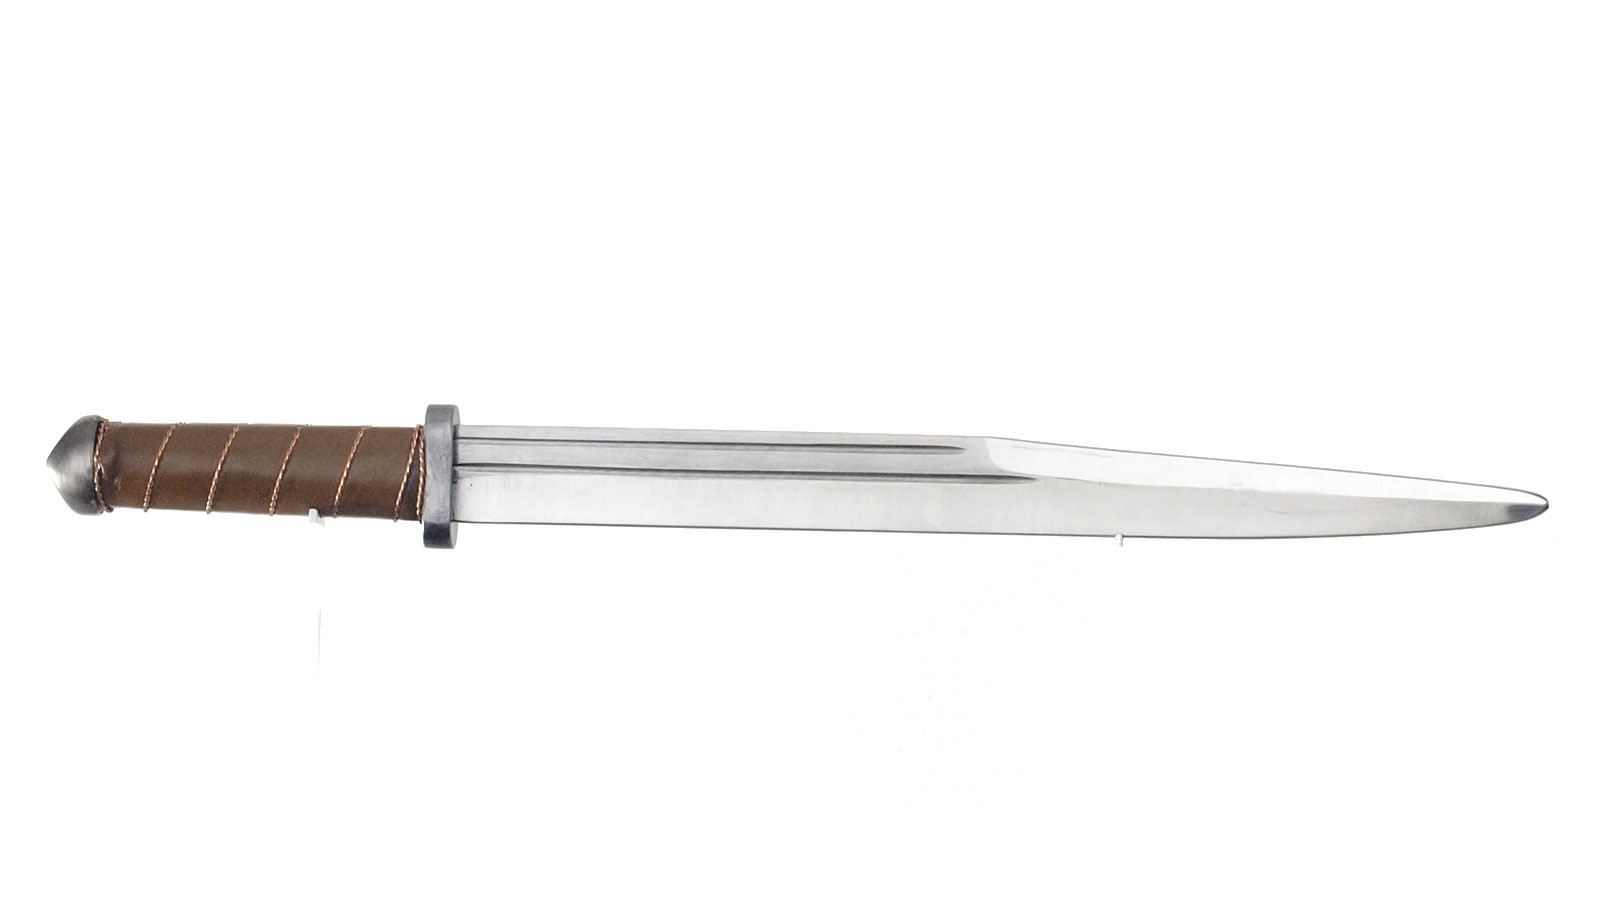 Sax Knife, Version Feather Blade